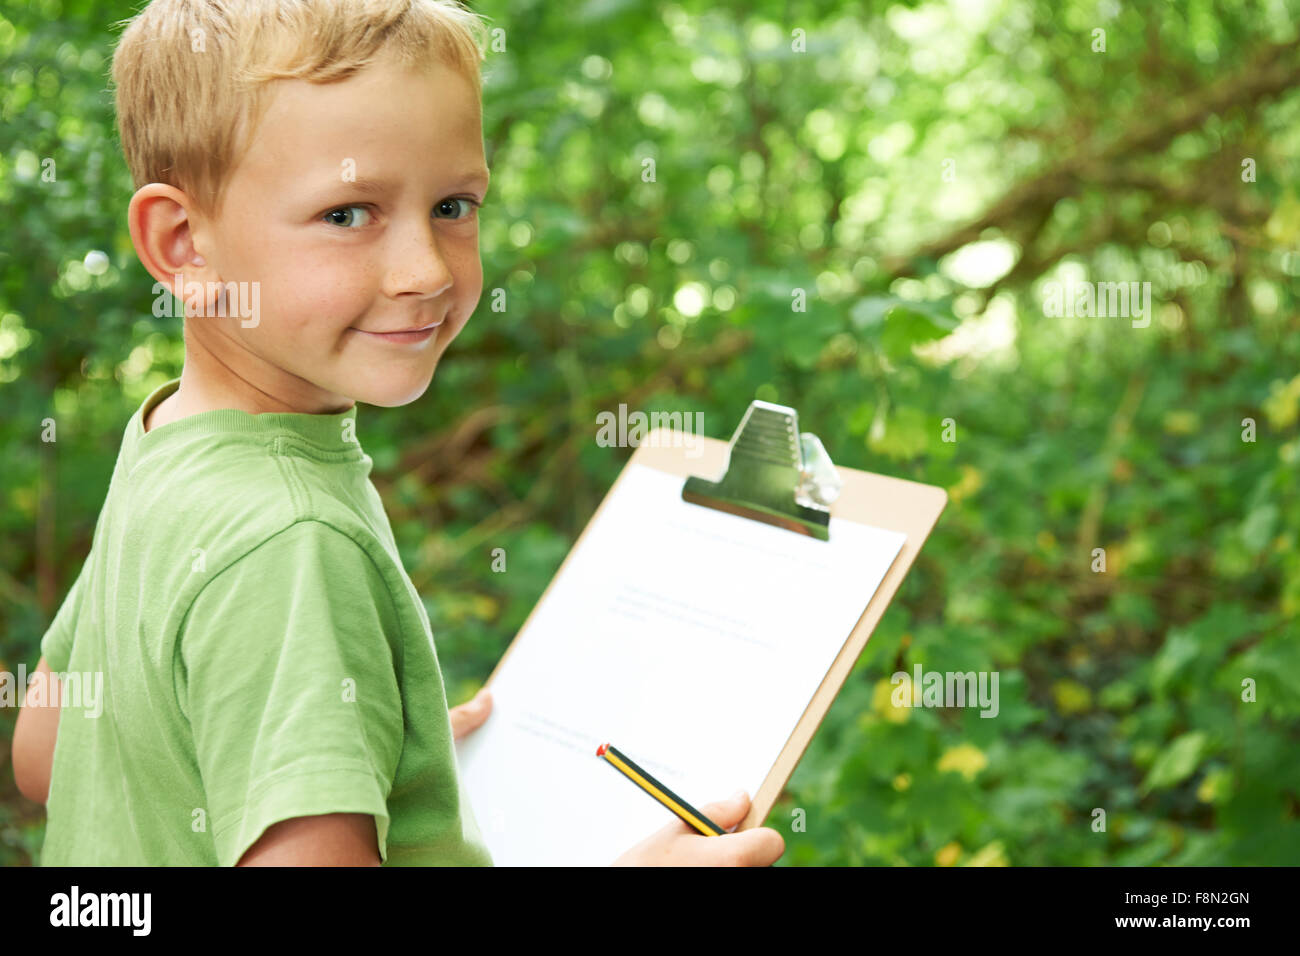 Boy Making Notes On School Nature Field Trip Stock Photo